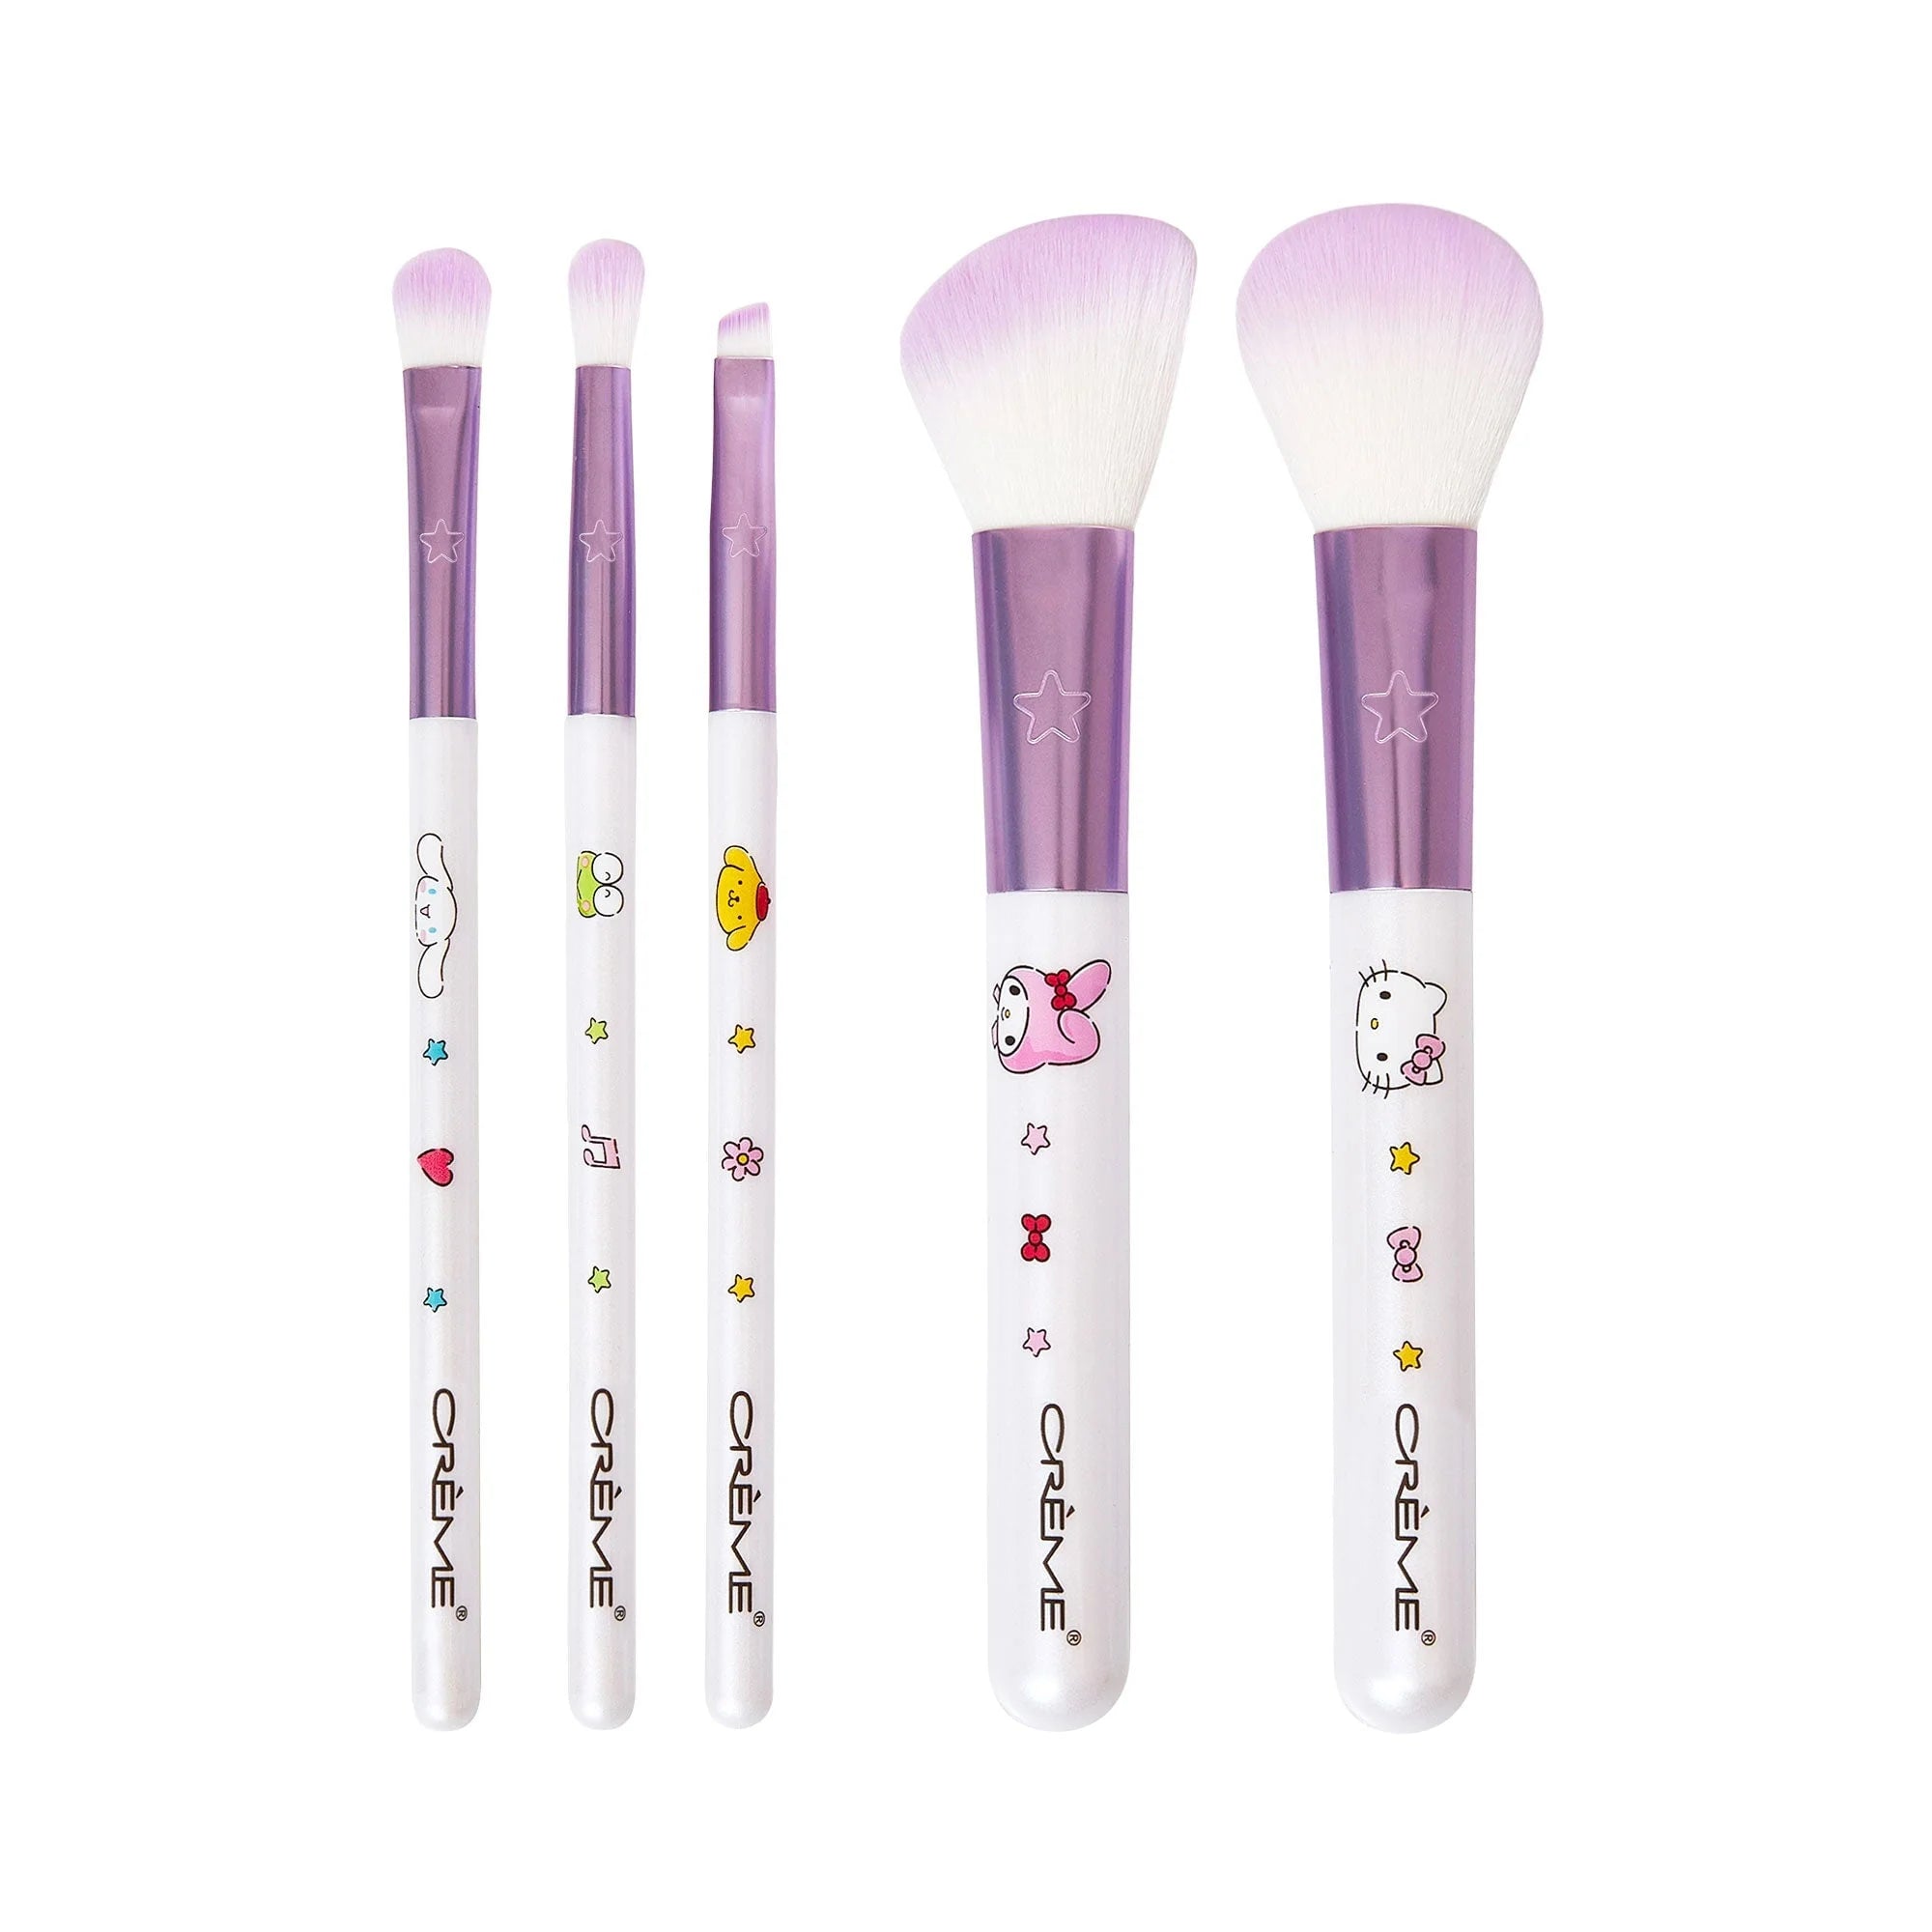 The Creme Shop - Hello Kitty Holiday Flawless Finish Brush Collection